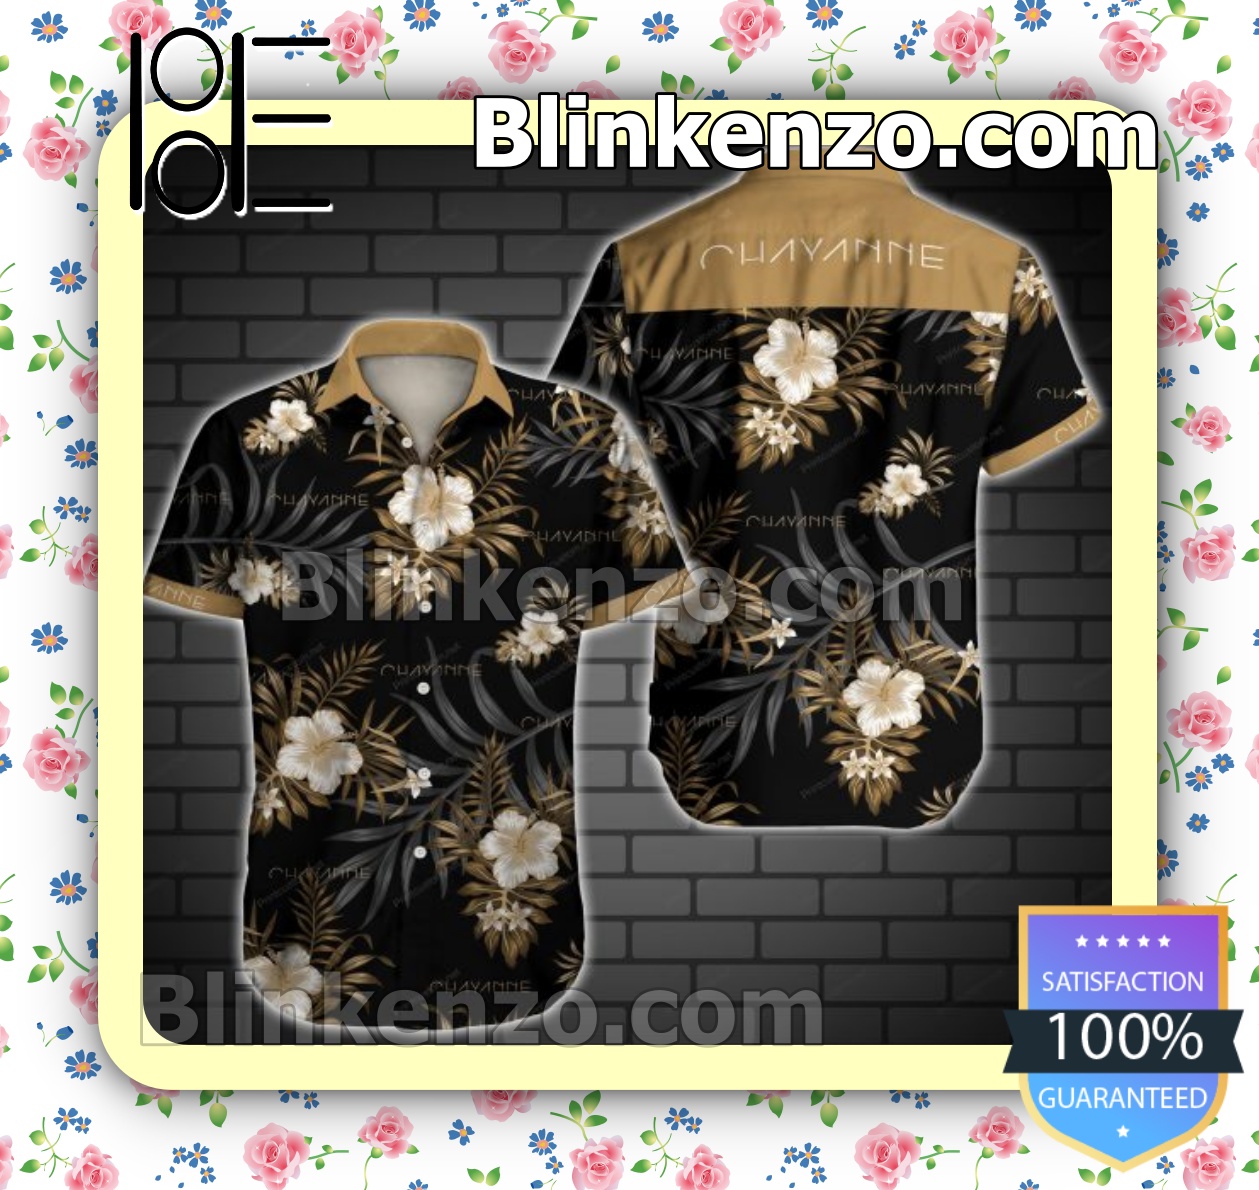 Get Here Chayanne Brown Tropical Floral Black Summer Shirts